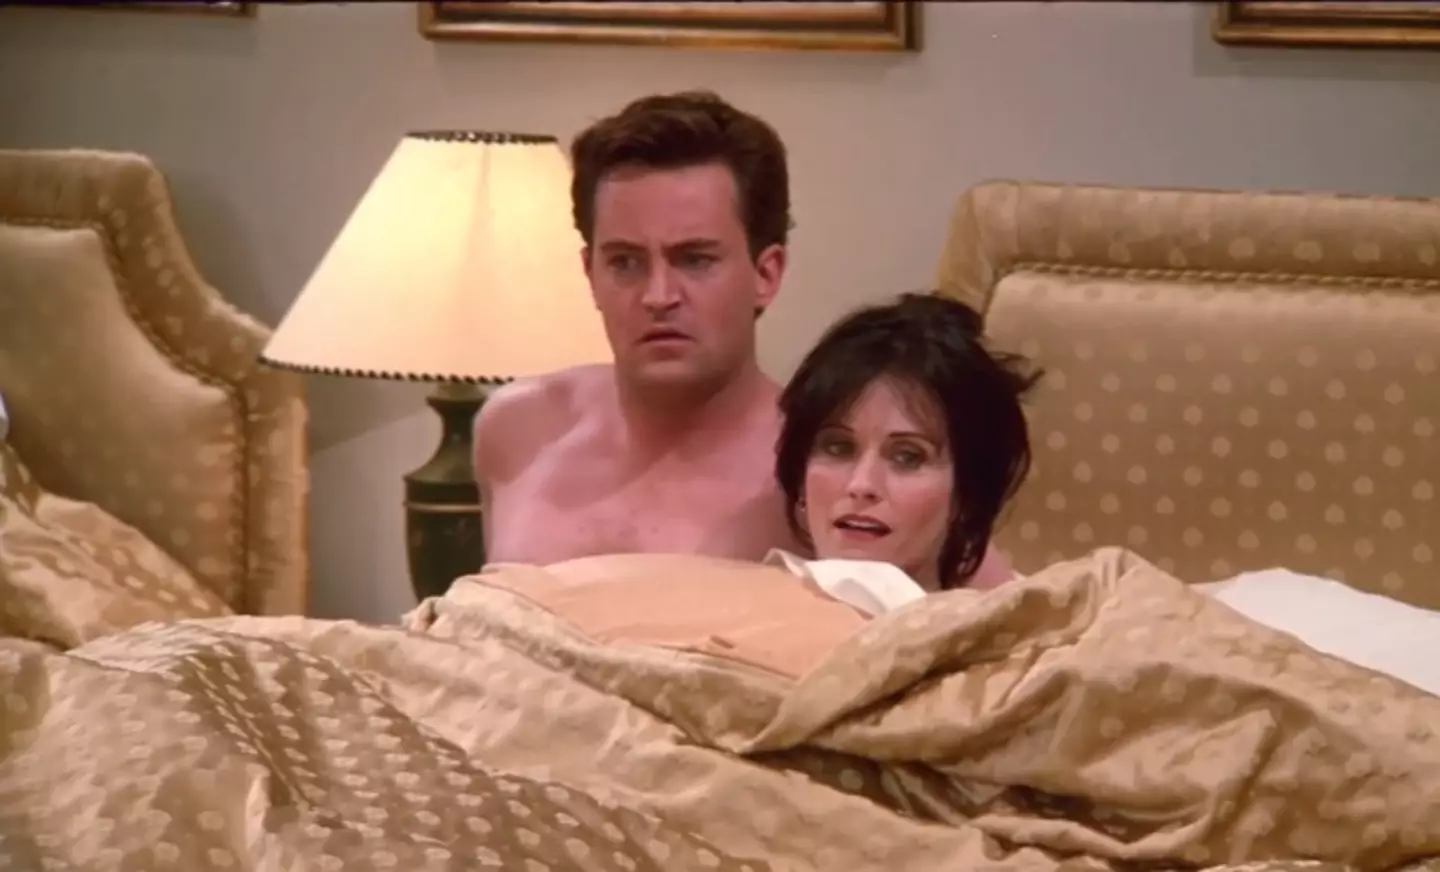 Courteney Cox shared one of her favourite scenes that she performed with Matthew Perry.